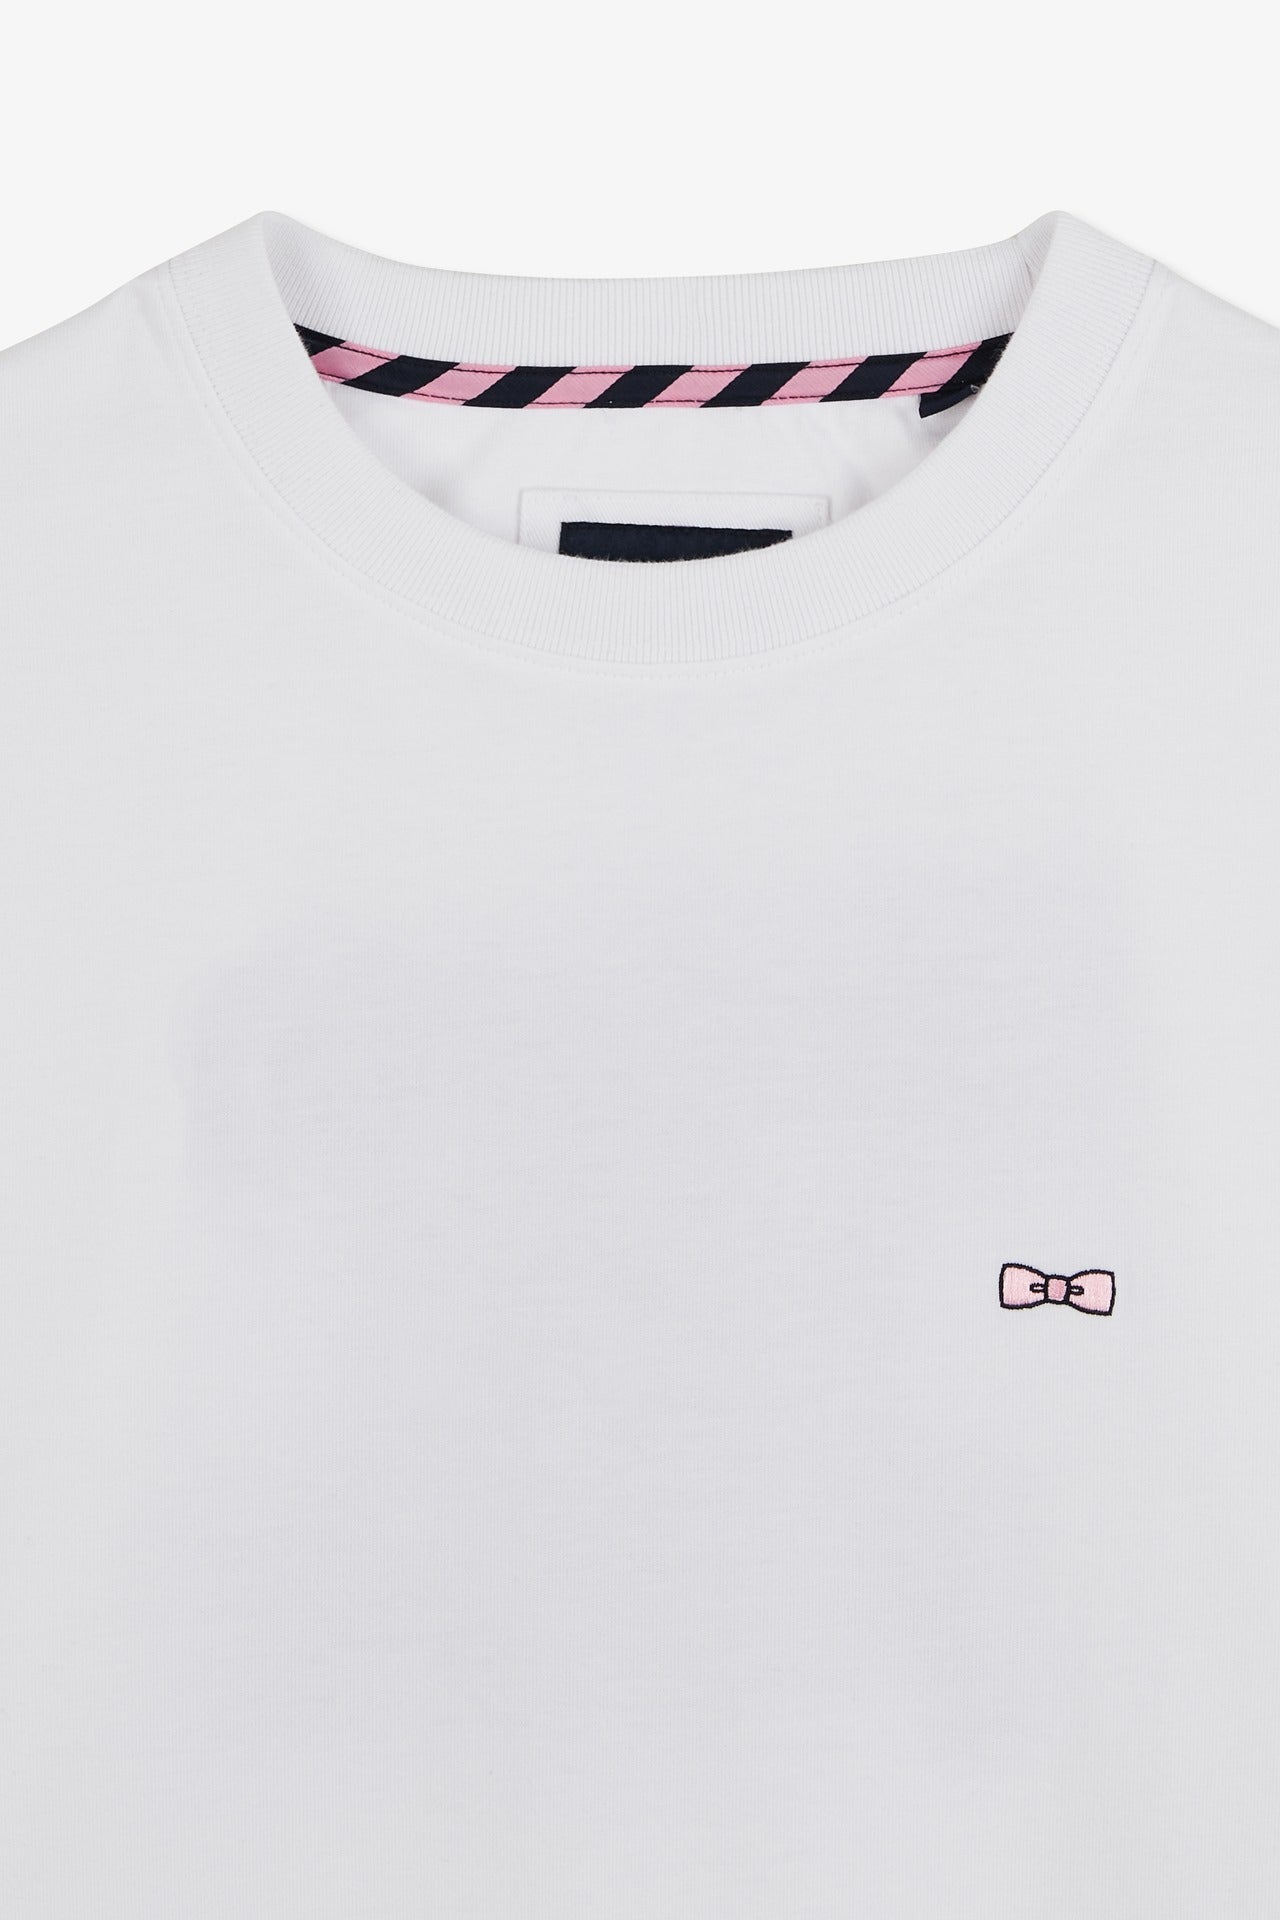 White T-shirt with Eden Park embroidery - Image 8